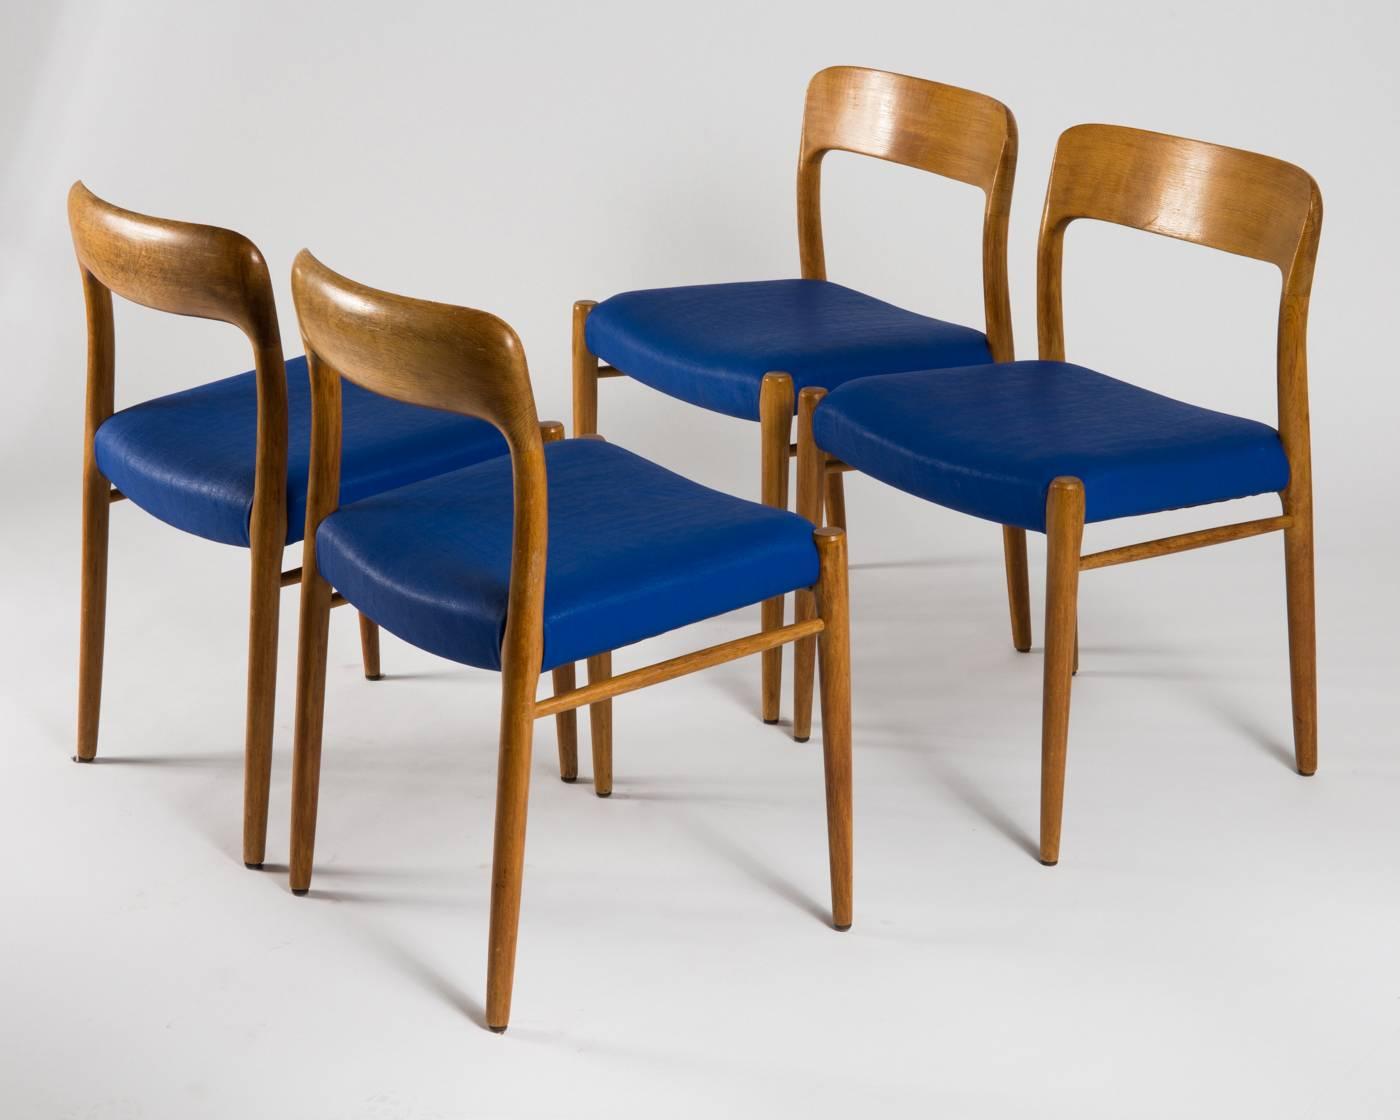 Set of four beautiful dining chairs in solid oak model 75 designed by Niels Otto Møller and manufactured by J. L. Møller. One of N.O. Møller's most coveted designs with its elegant and organic shape. The oak shows a nice golden brown patina achieved